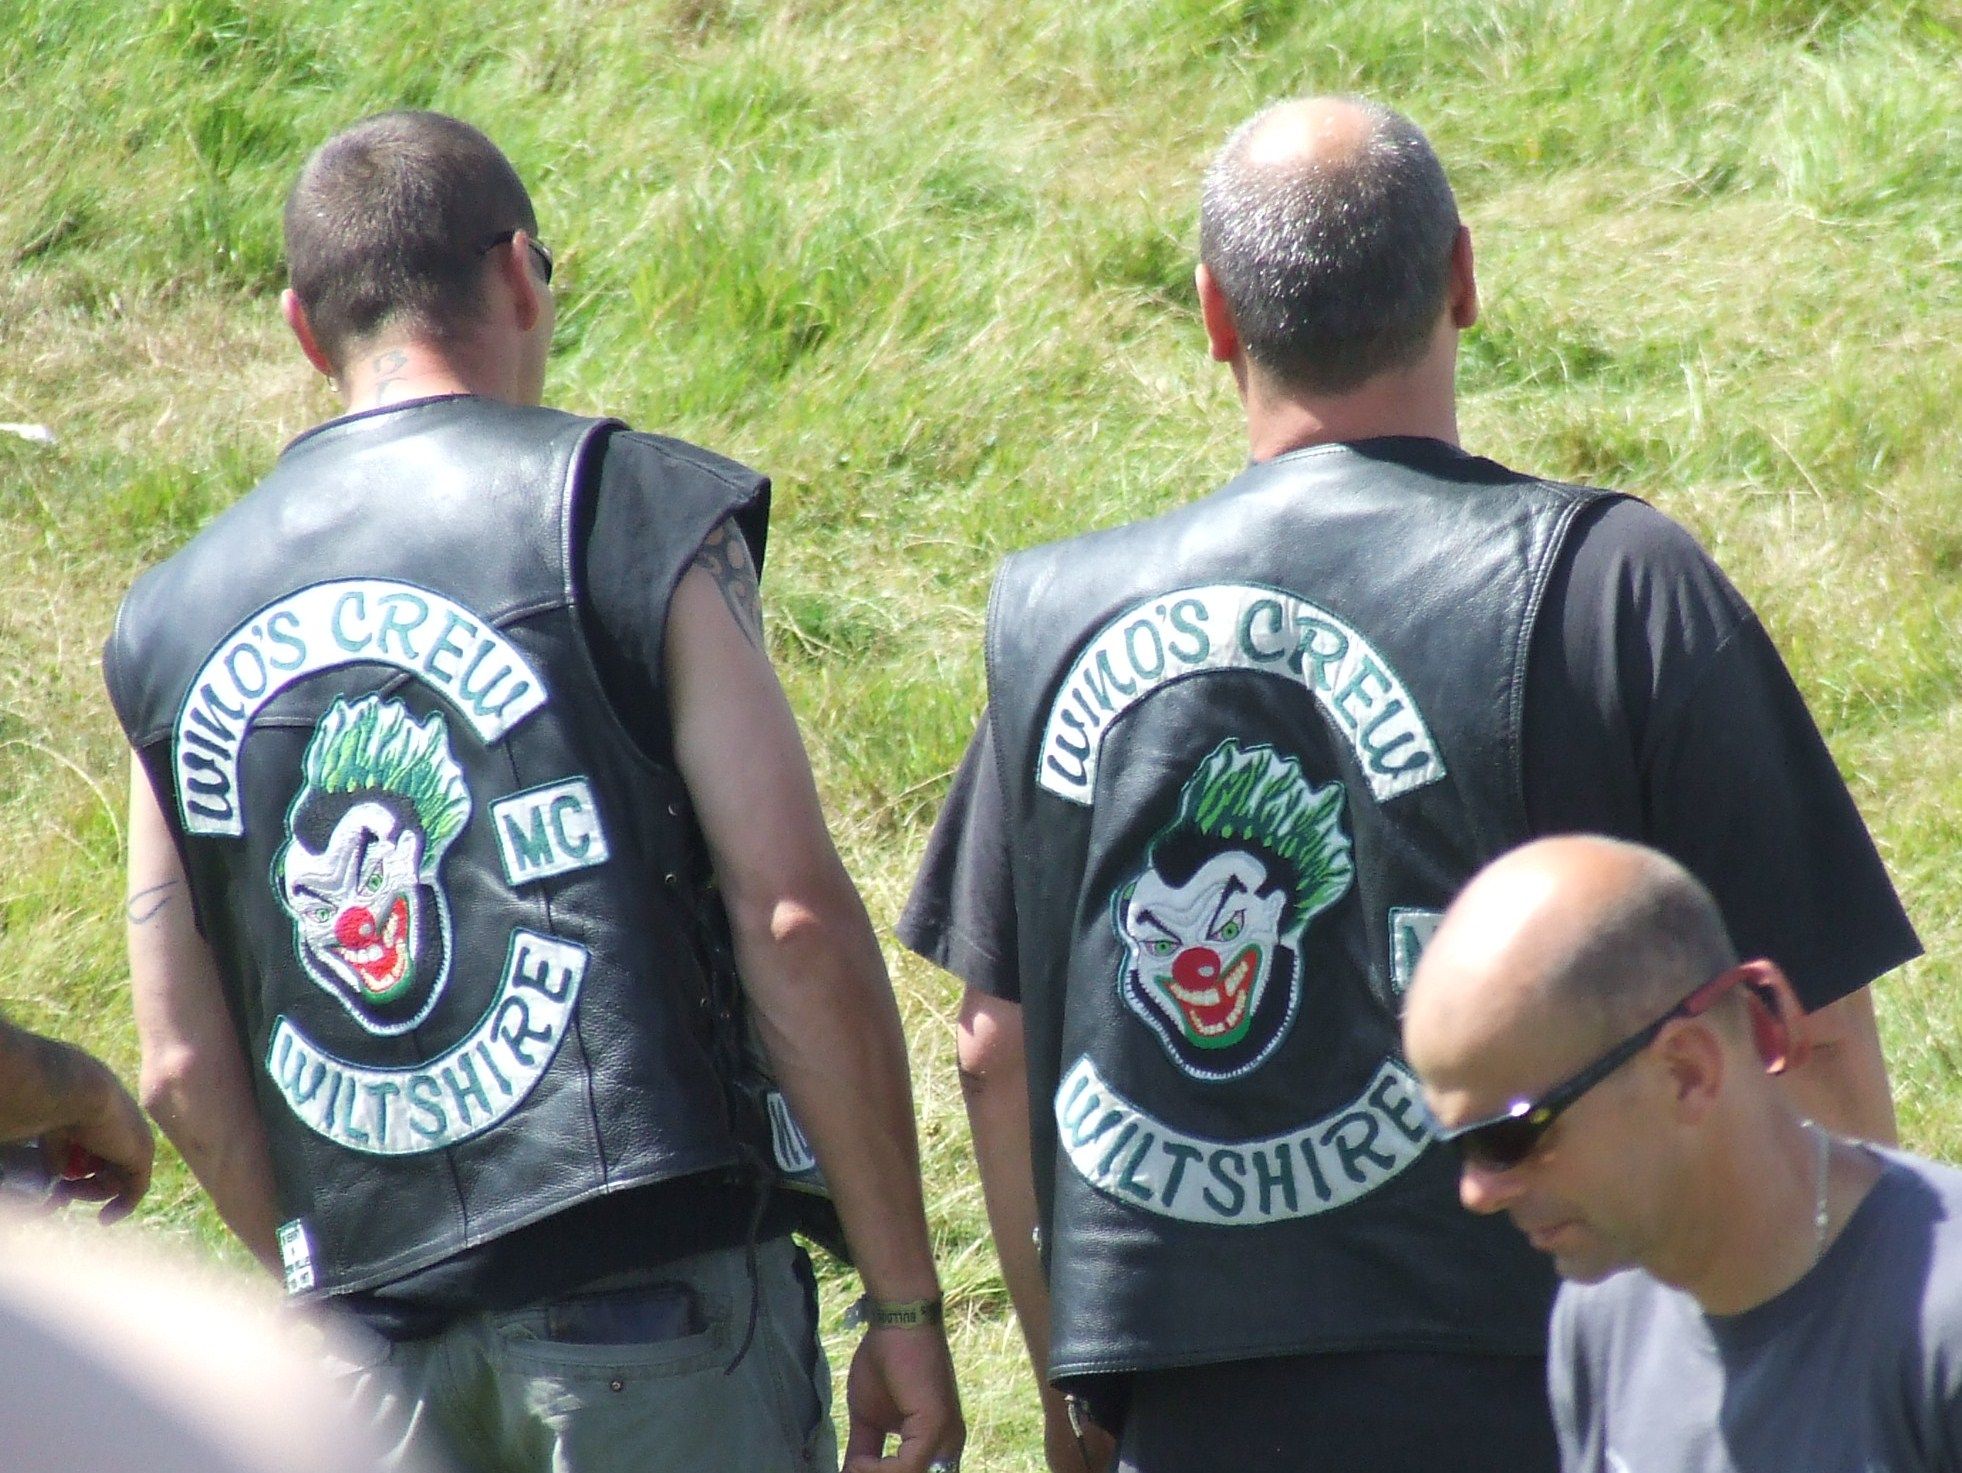 motorcycle club patches and colors